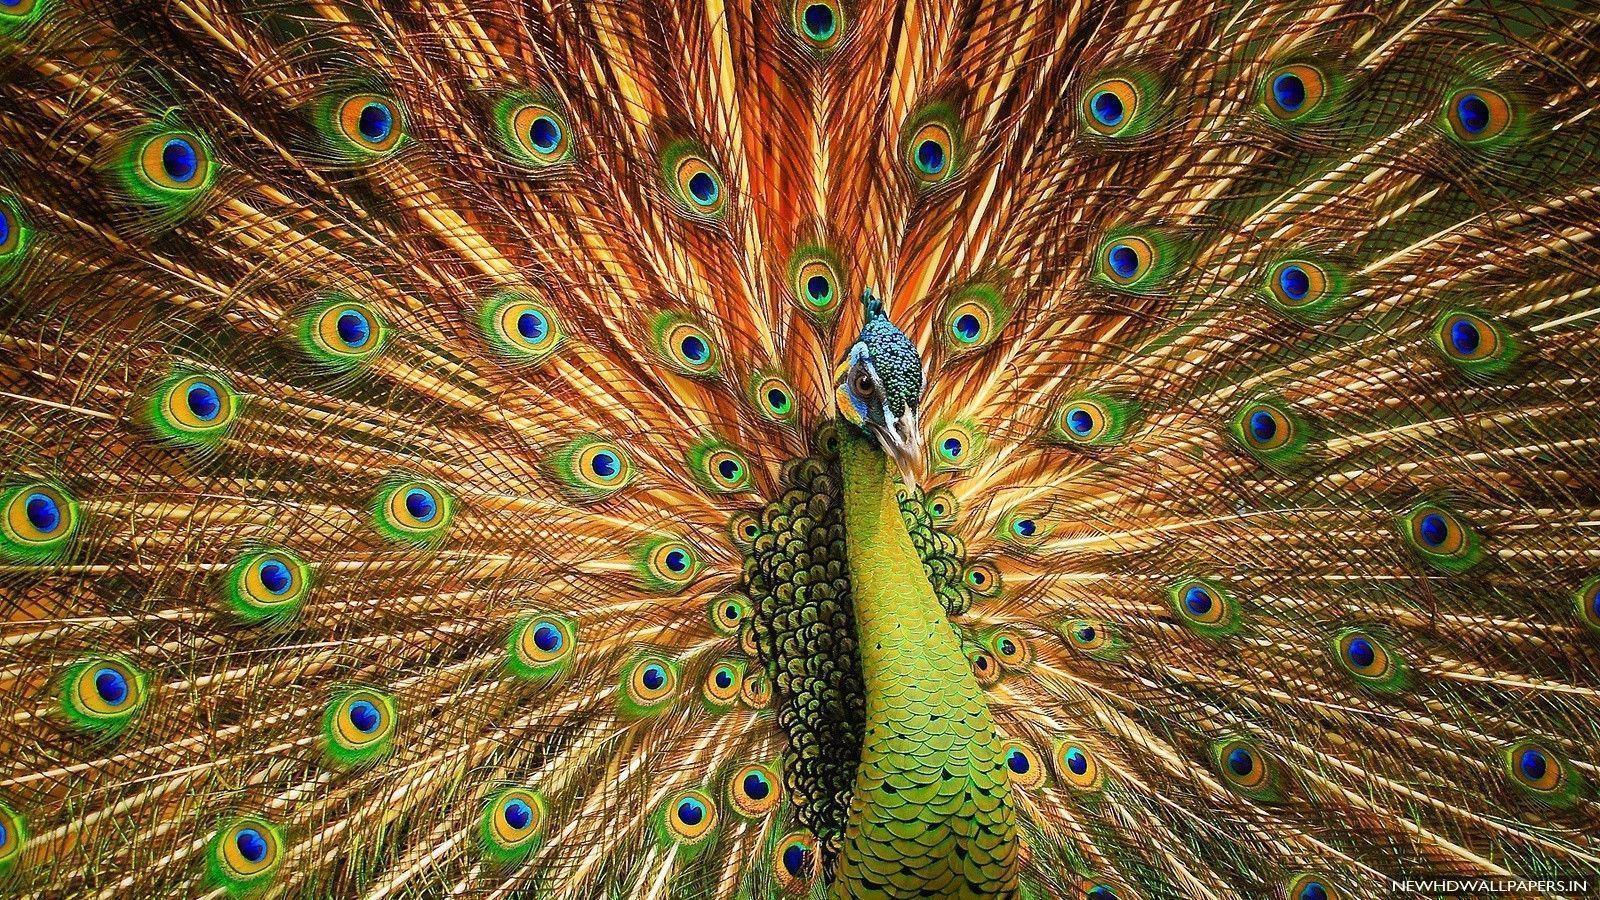 Wallpapers Of Peacock Feathers HD 2016 - Wallpaper Cave